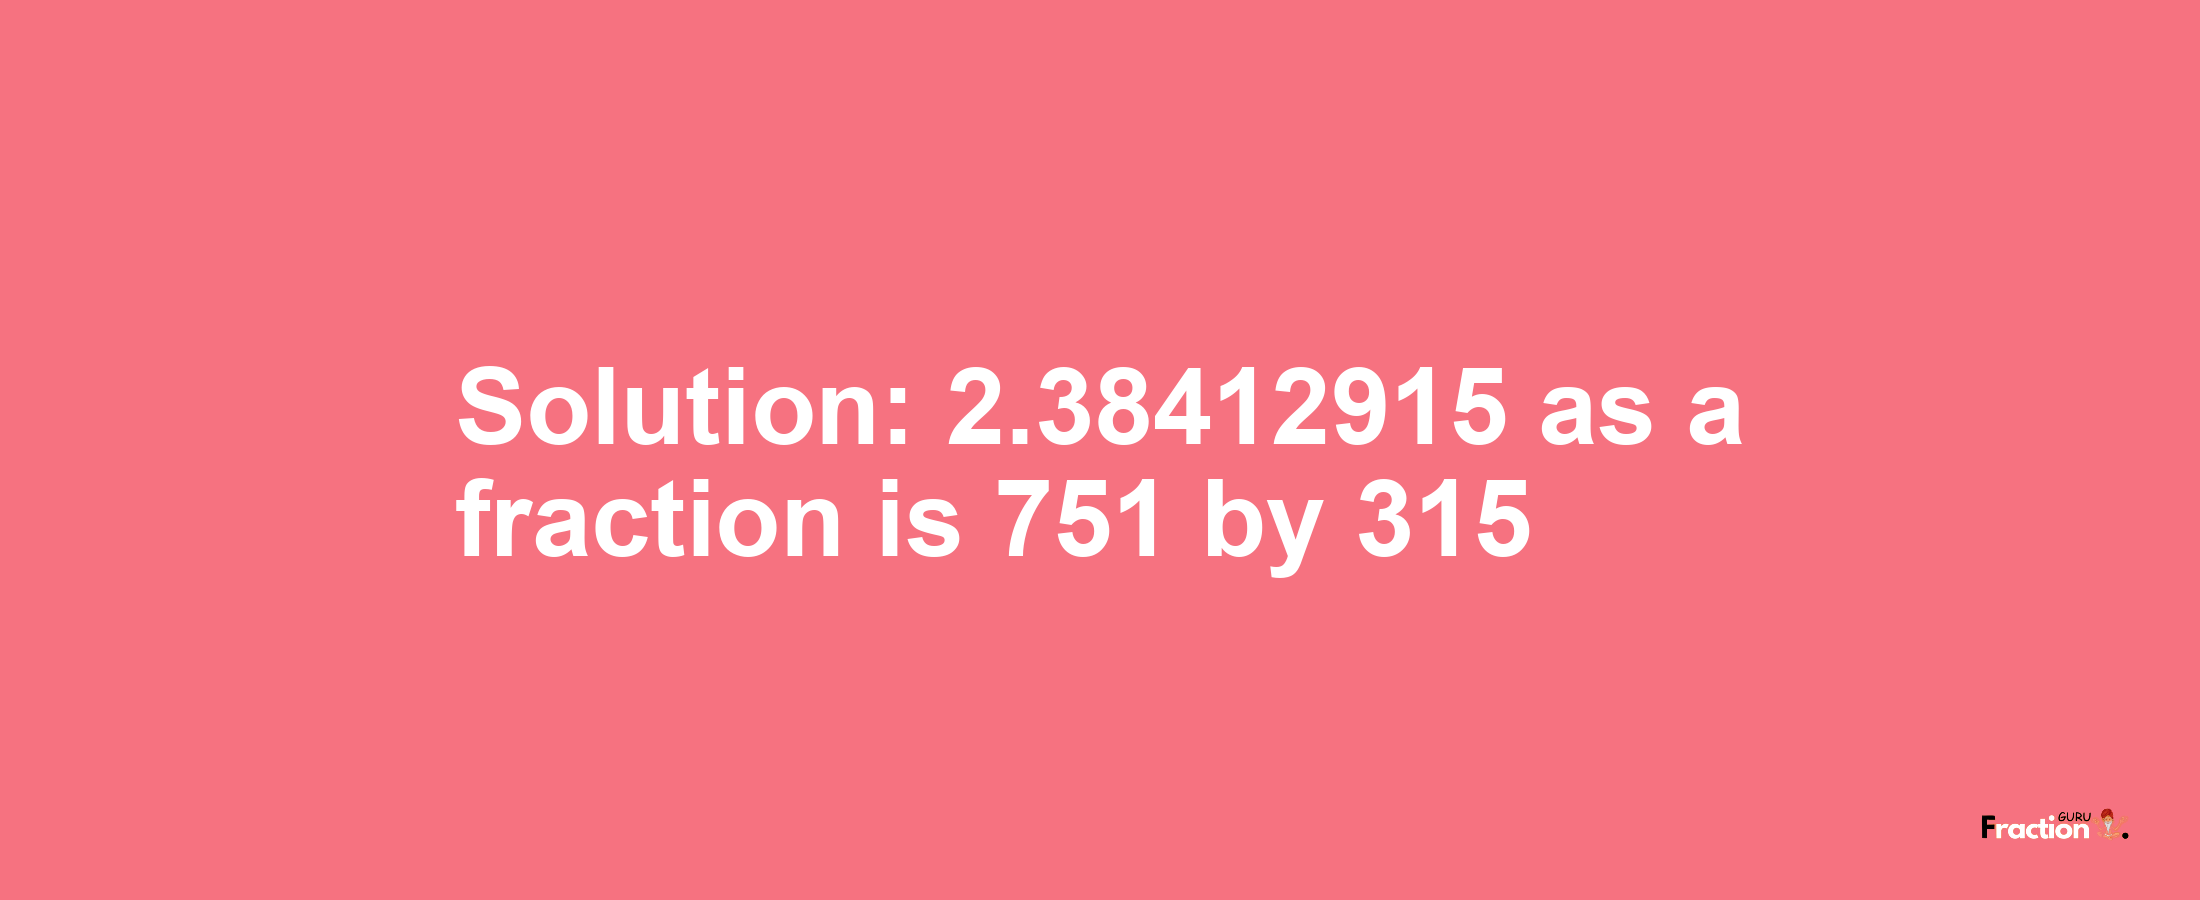 Solution:2.38412915 as a fraction is 751/315